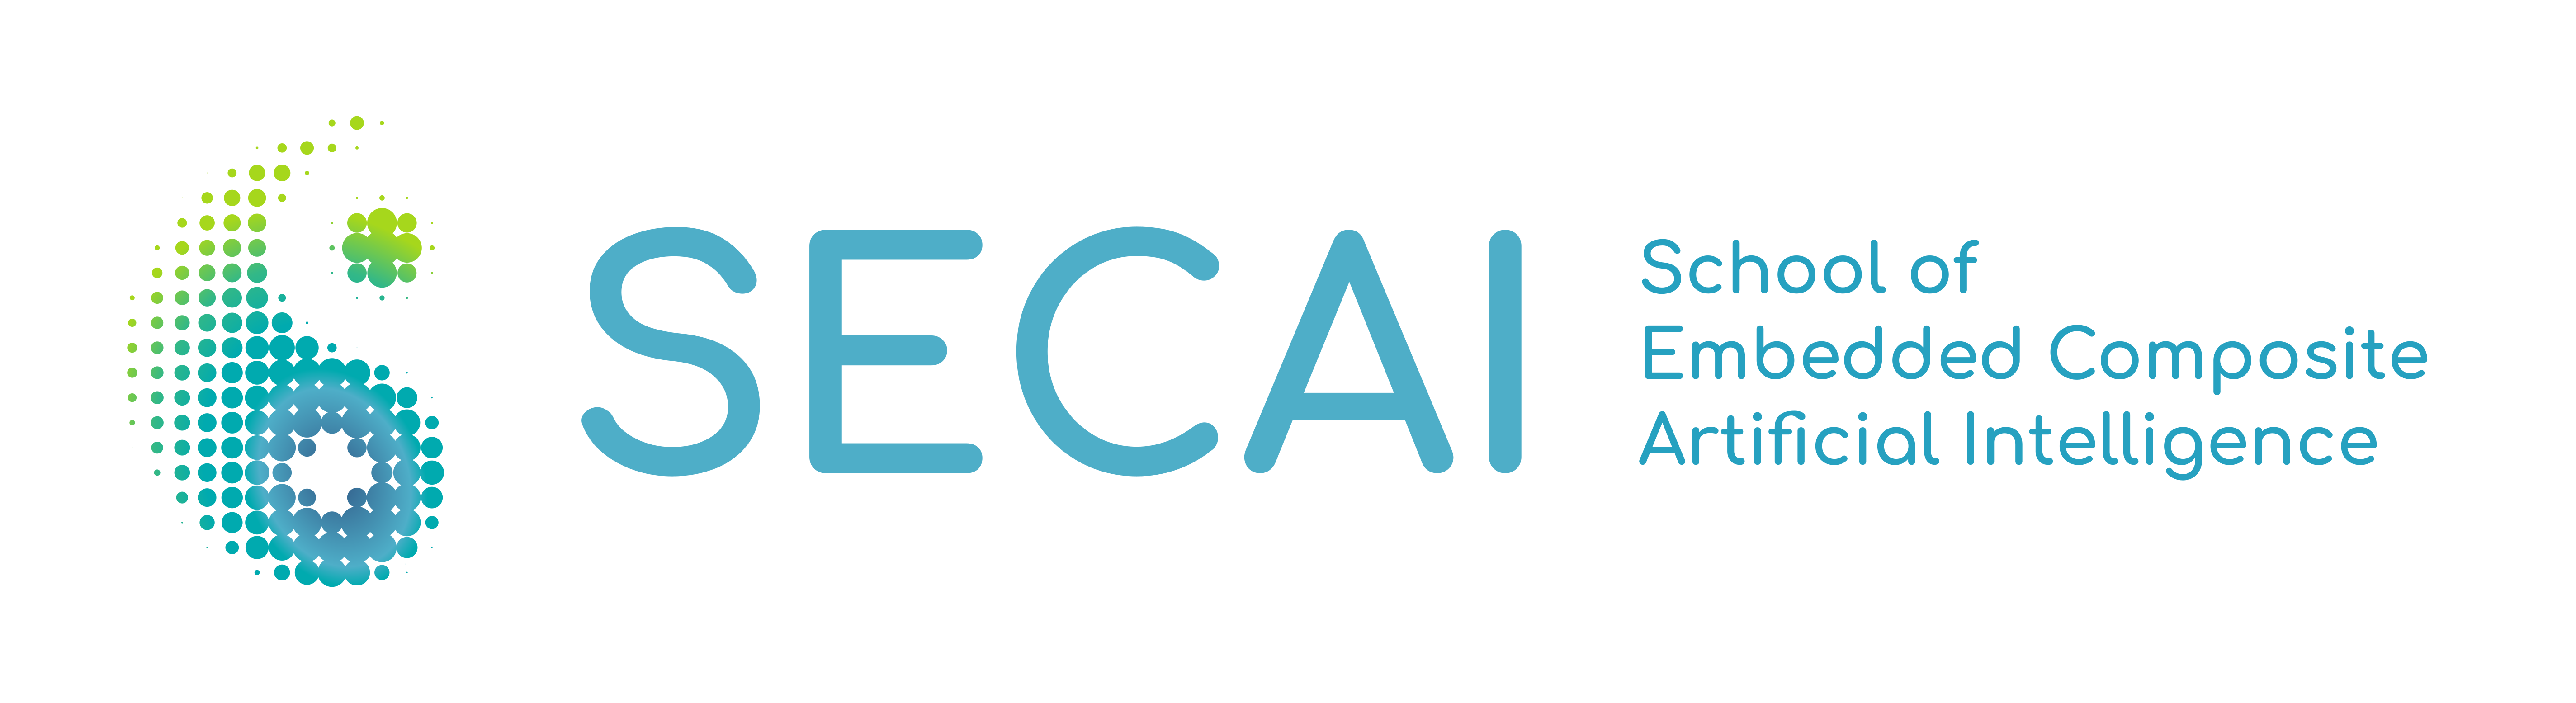 SECAI-School of Embedded Composite Artificial Intelligence